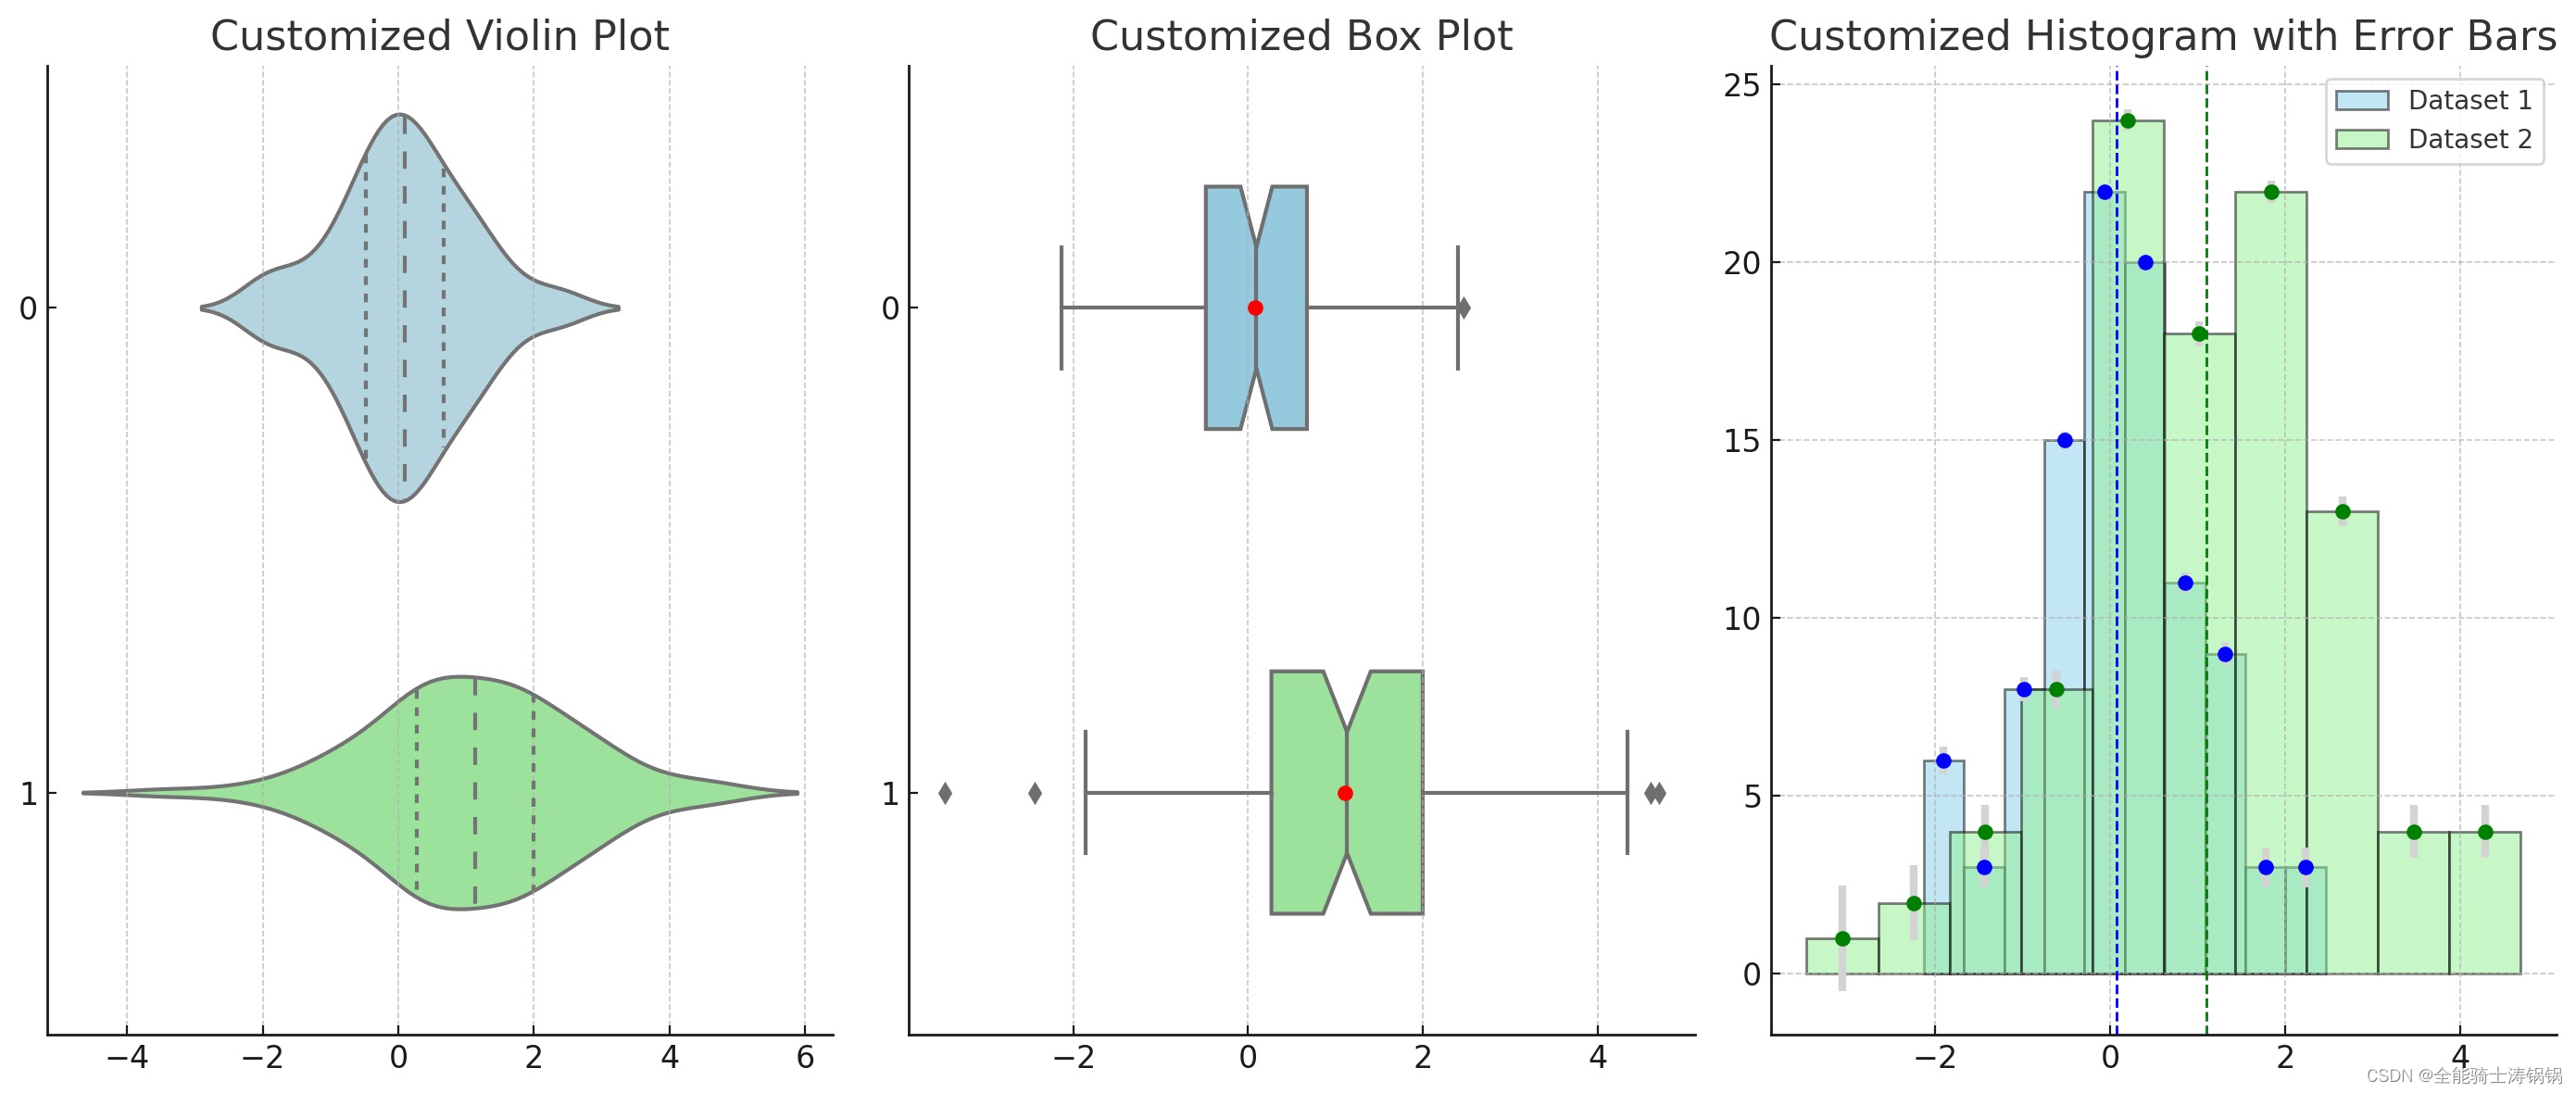 A Brief Introduction of the Violin Plot and Box Plot